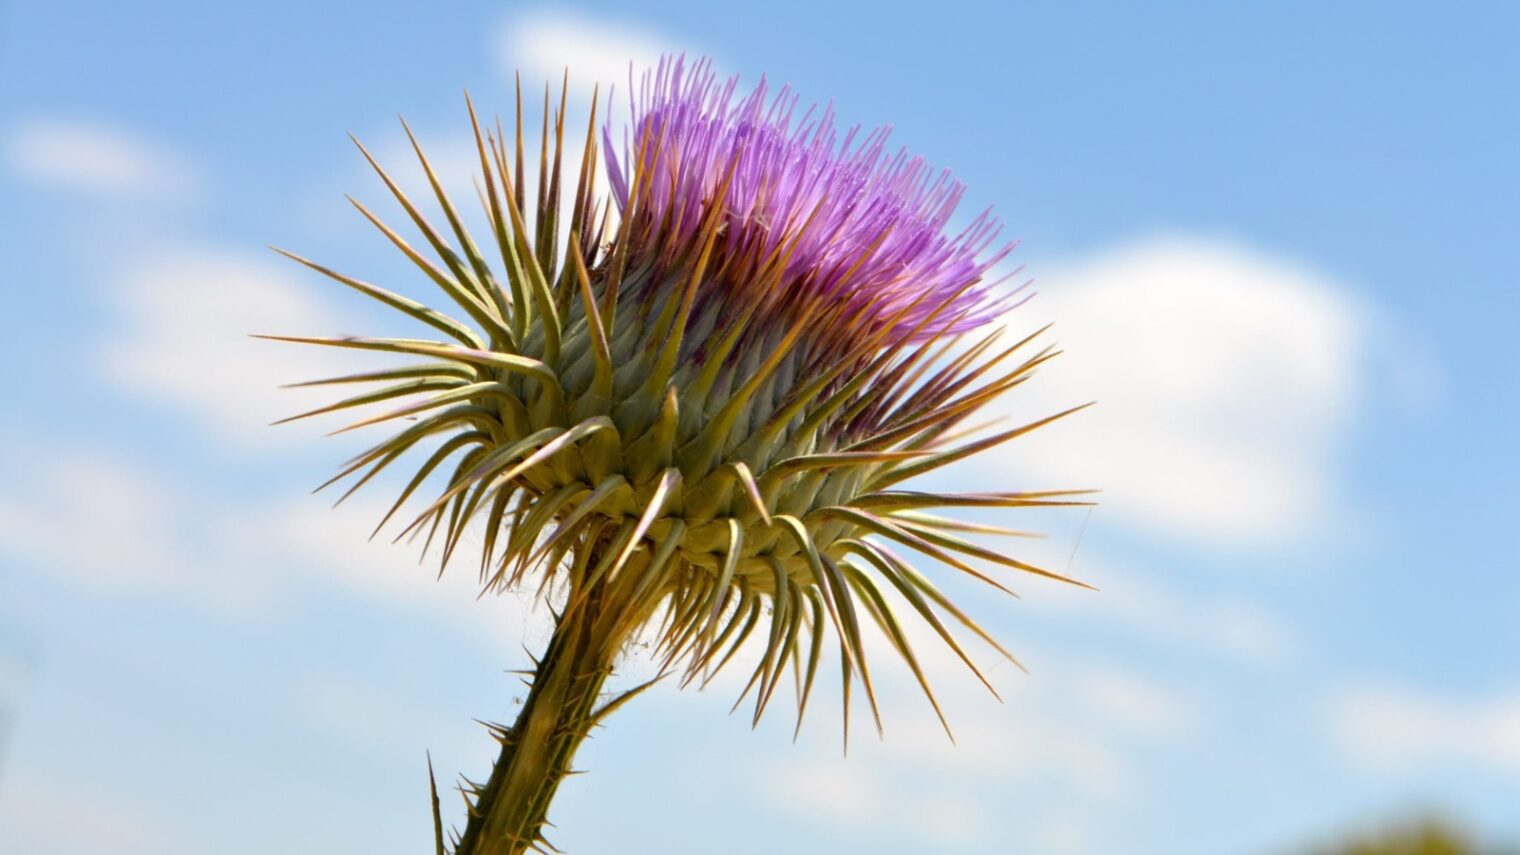 This unusual cotton thistle (Onopordum cynarocephalum) begins as a spiky green ball. Then its head turns purple and its spikes turn into “petals.” Photo by Daniel Santacruz